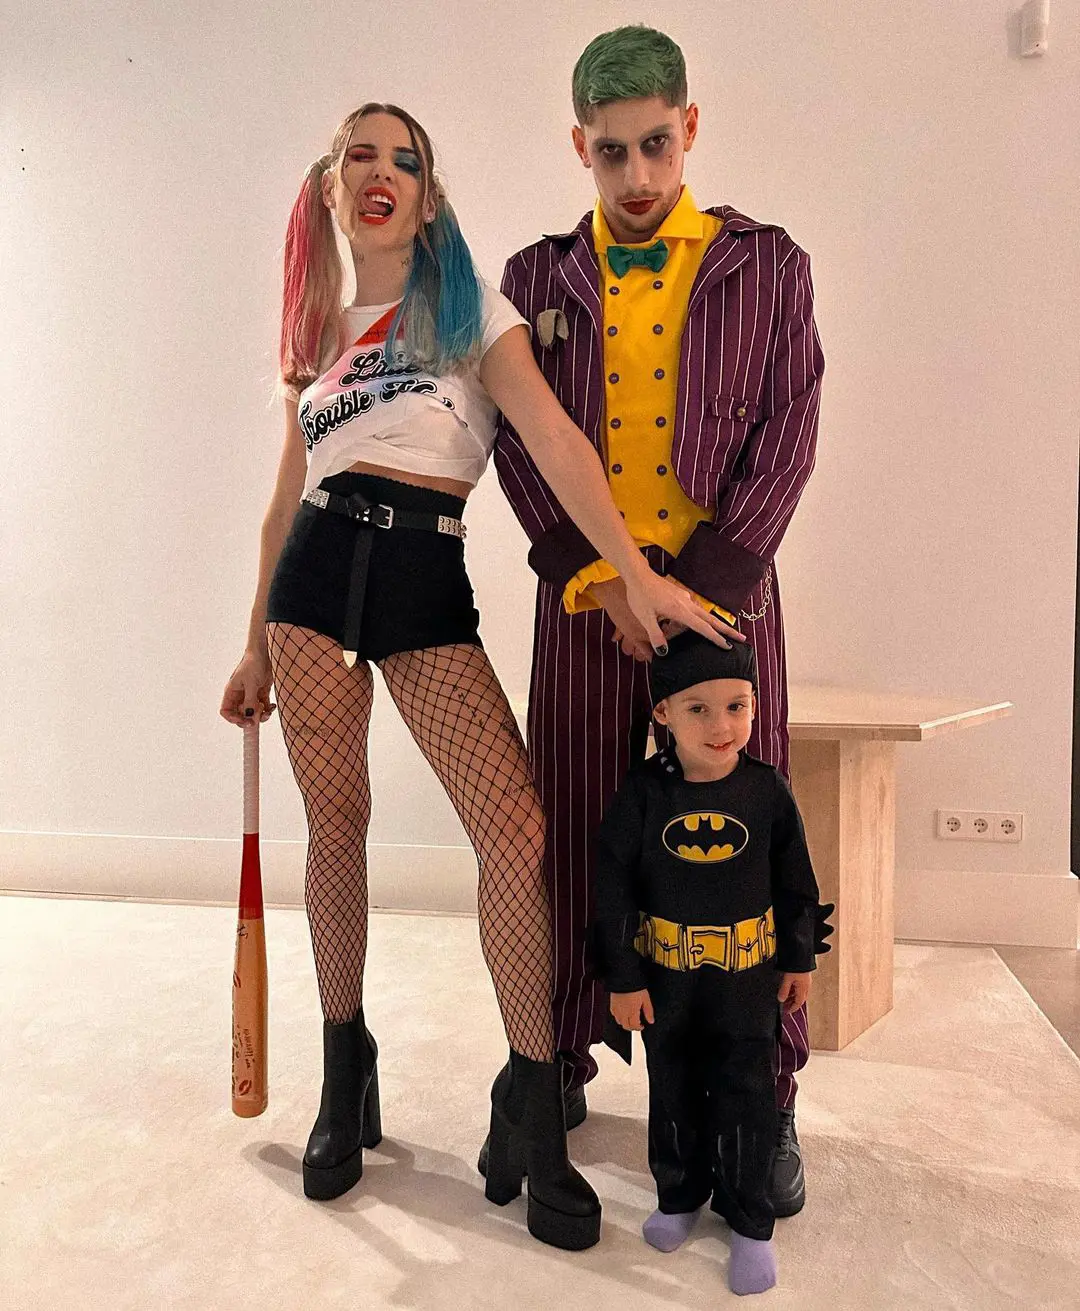 The Valverde family celebrated Hallowen dressed up as superheros and supervillians.